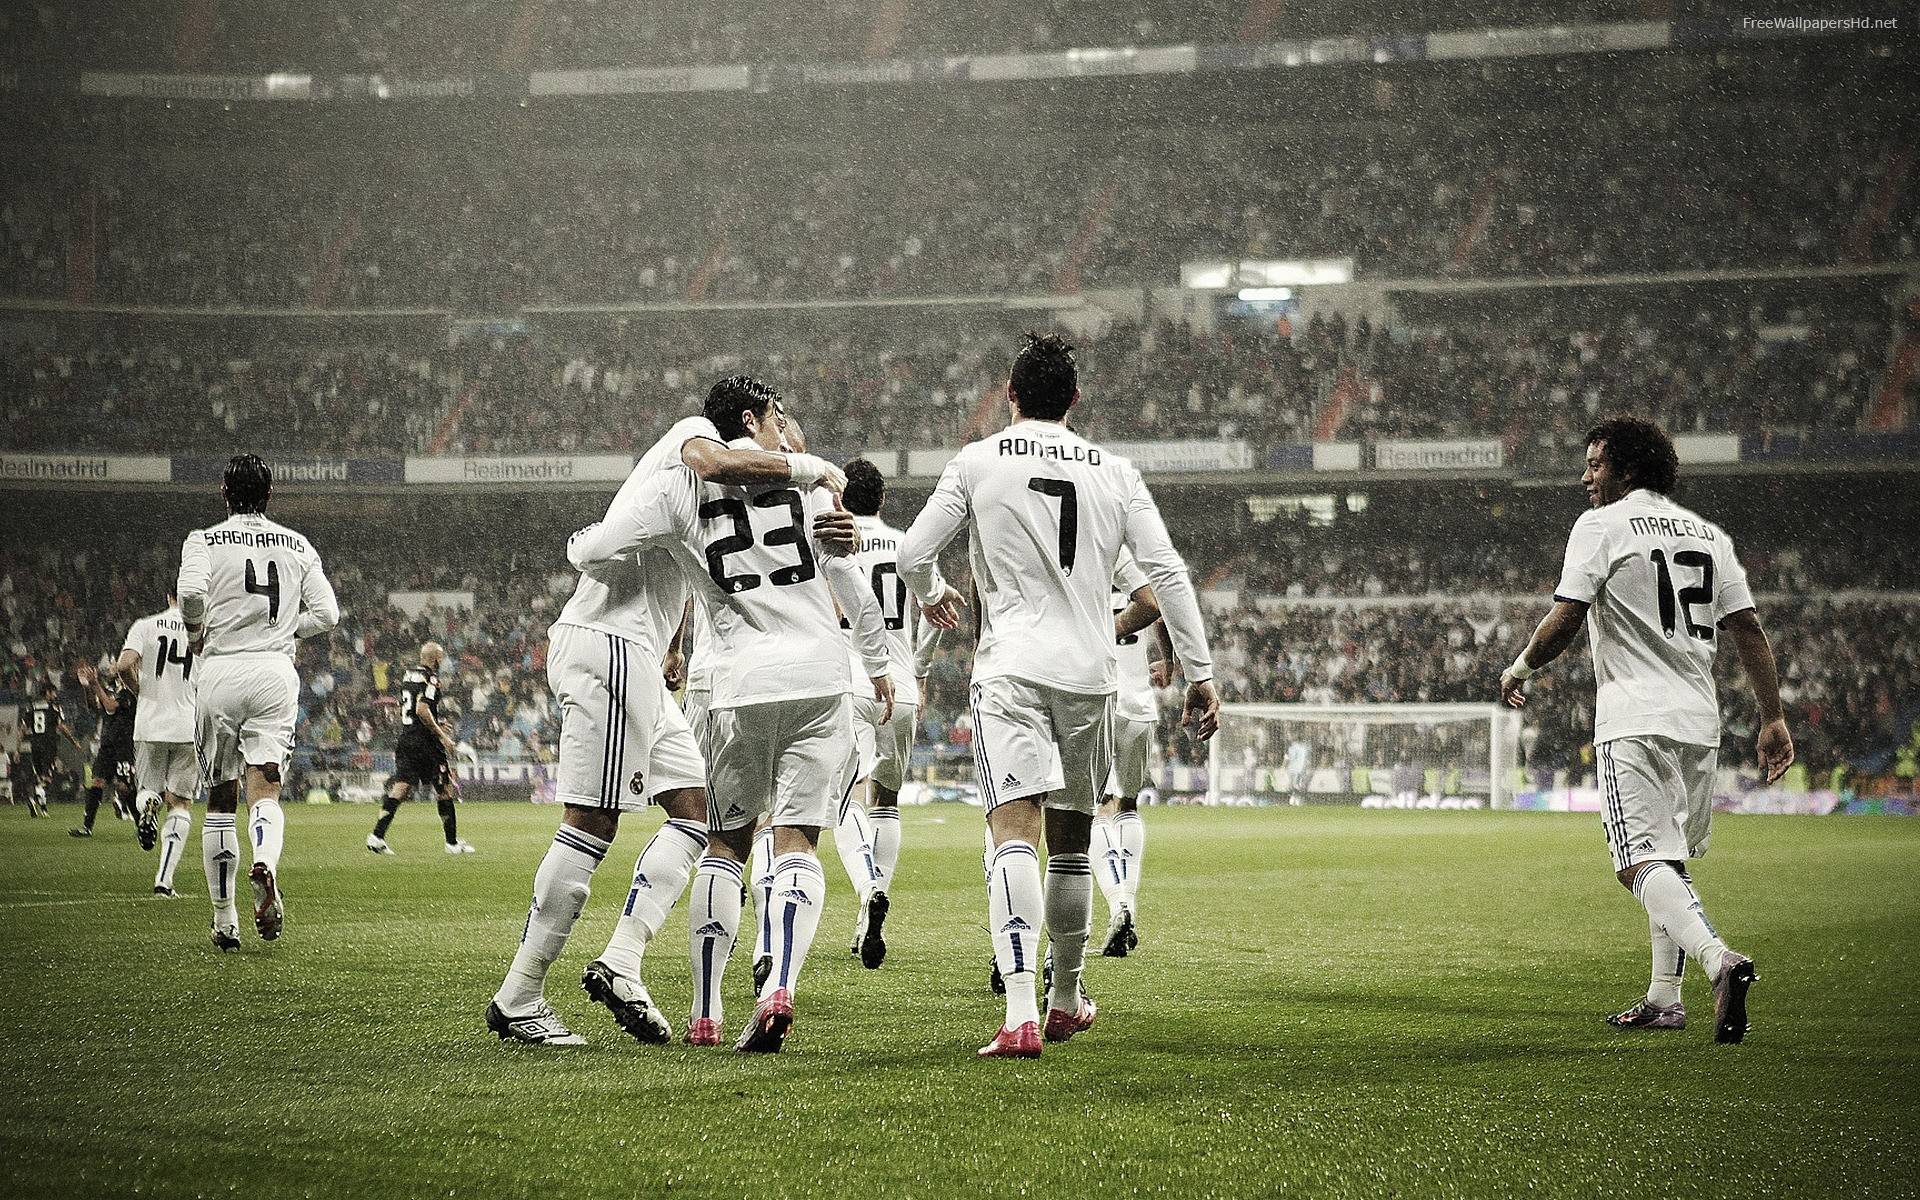 Real Madrid Wallpaper Android Smartphone Wallpaper. Cool